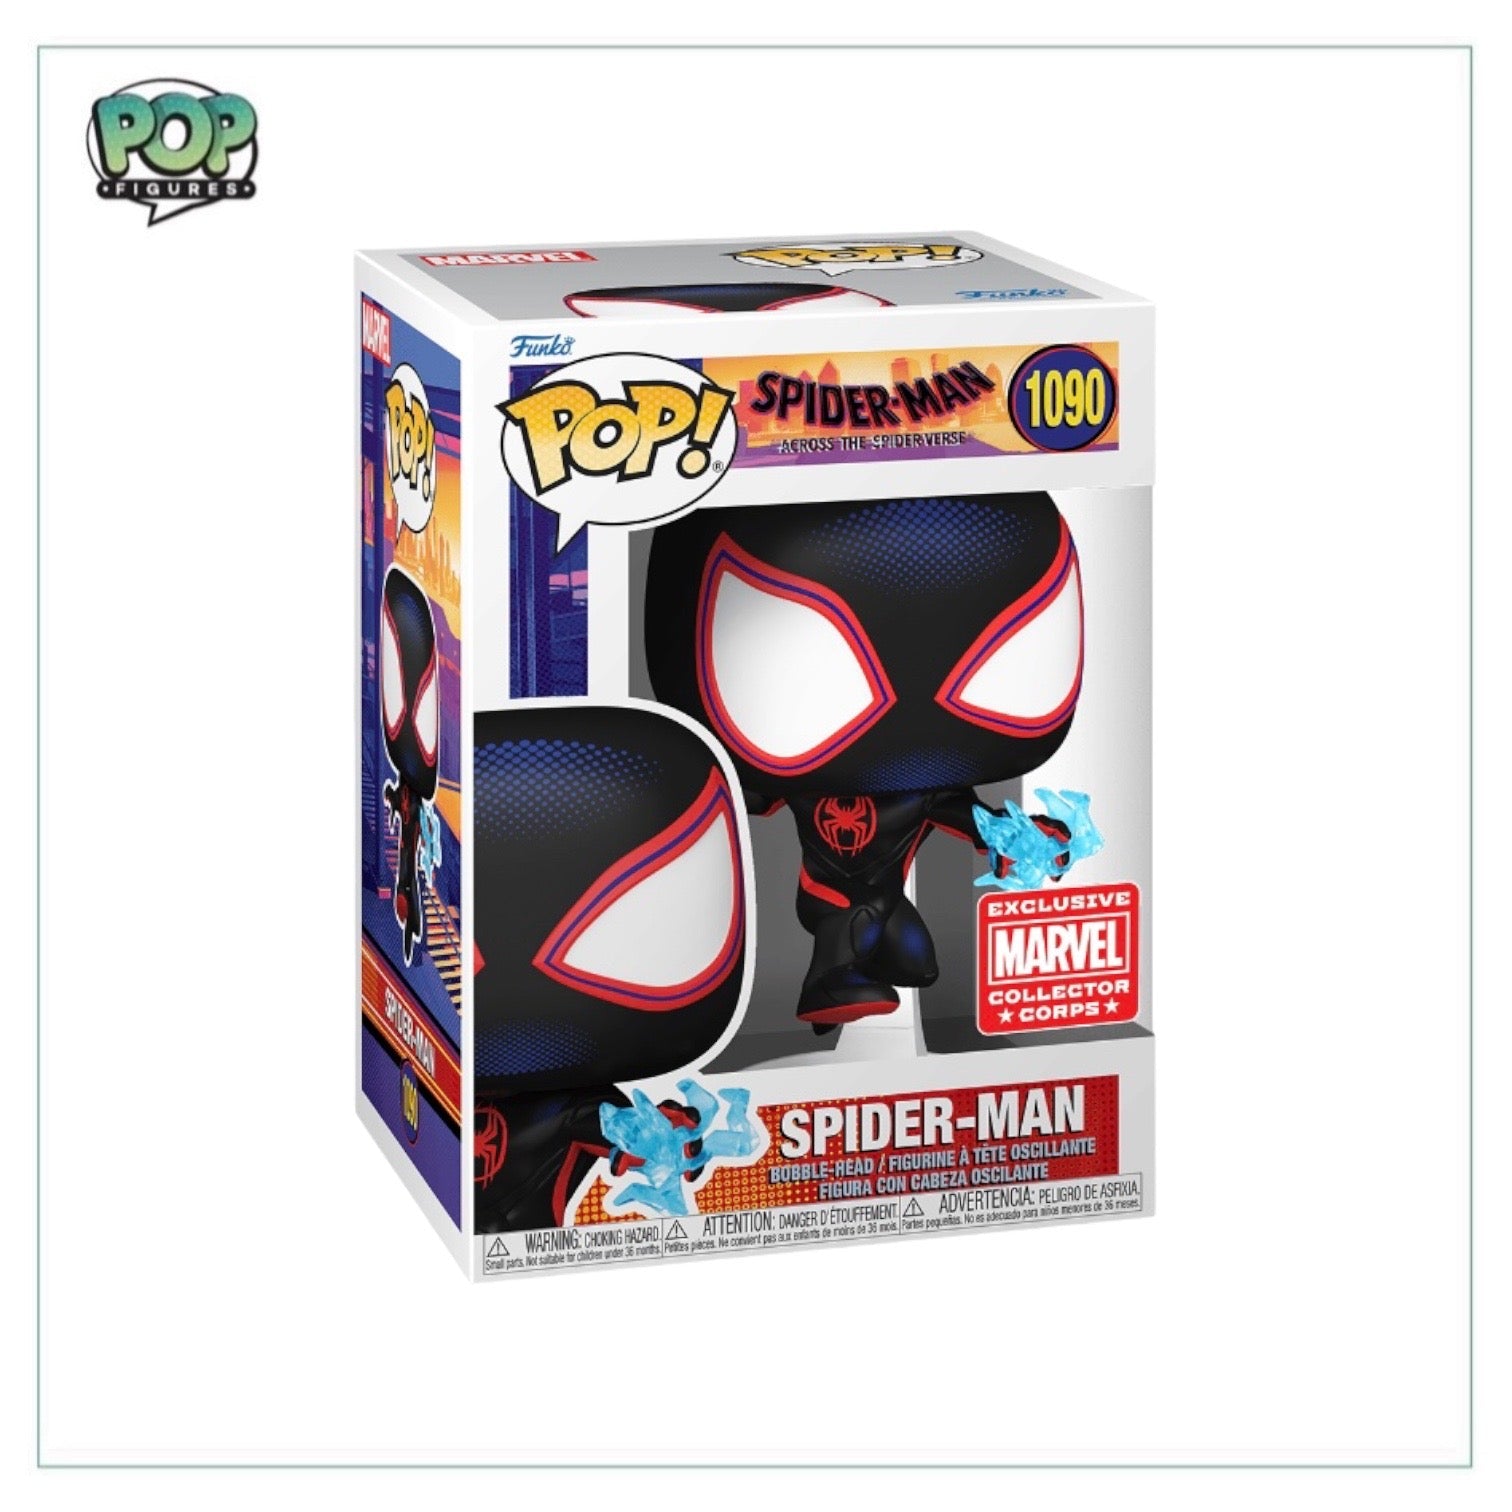 Spider-Man #1090 (w/ Electricity) Funko Pop! - Spider-Man Across the Spiderverse - Marvel Collector Corps Exclusive - Angry Cat